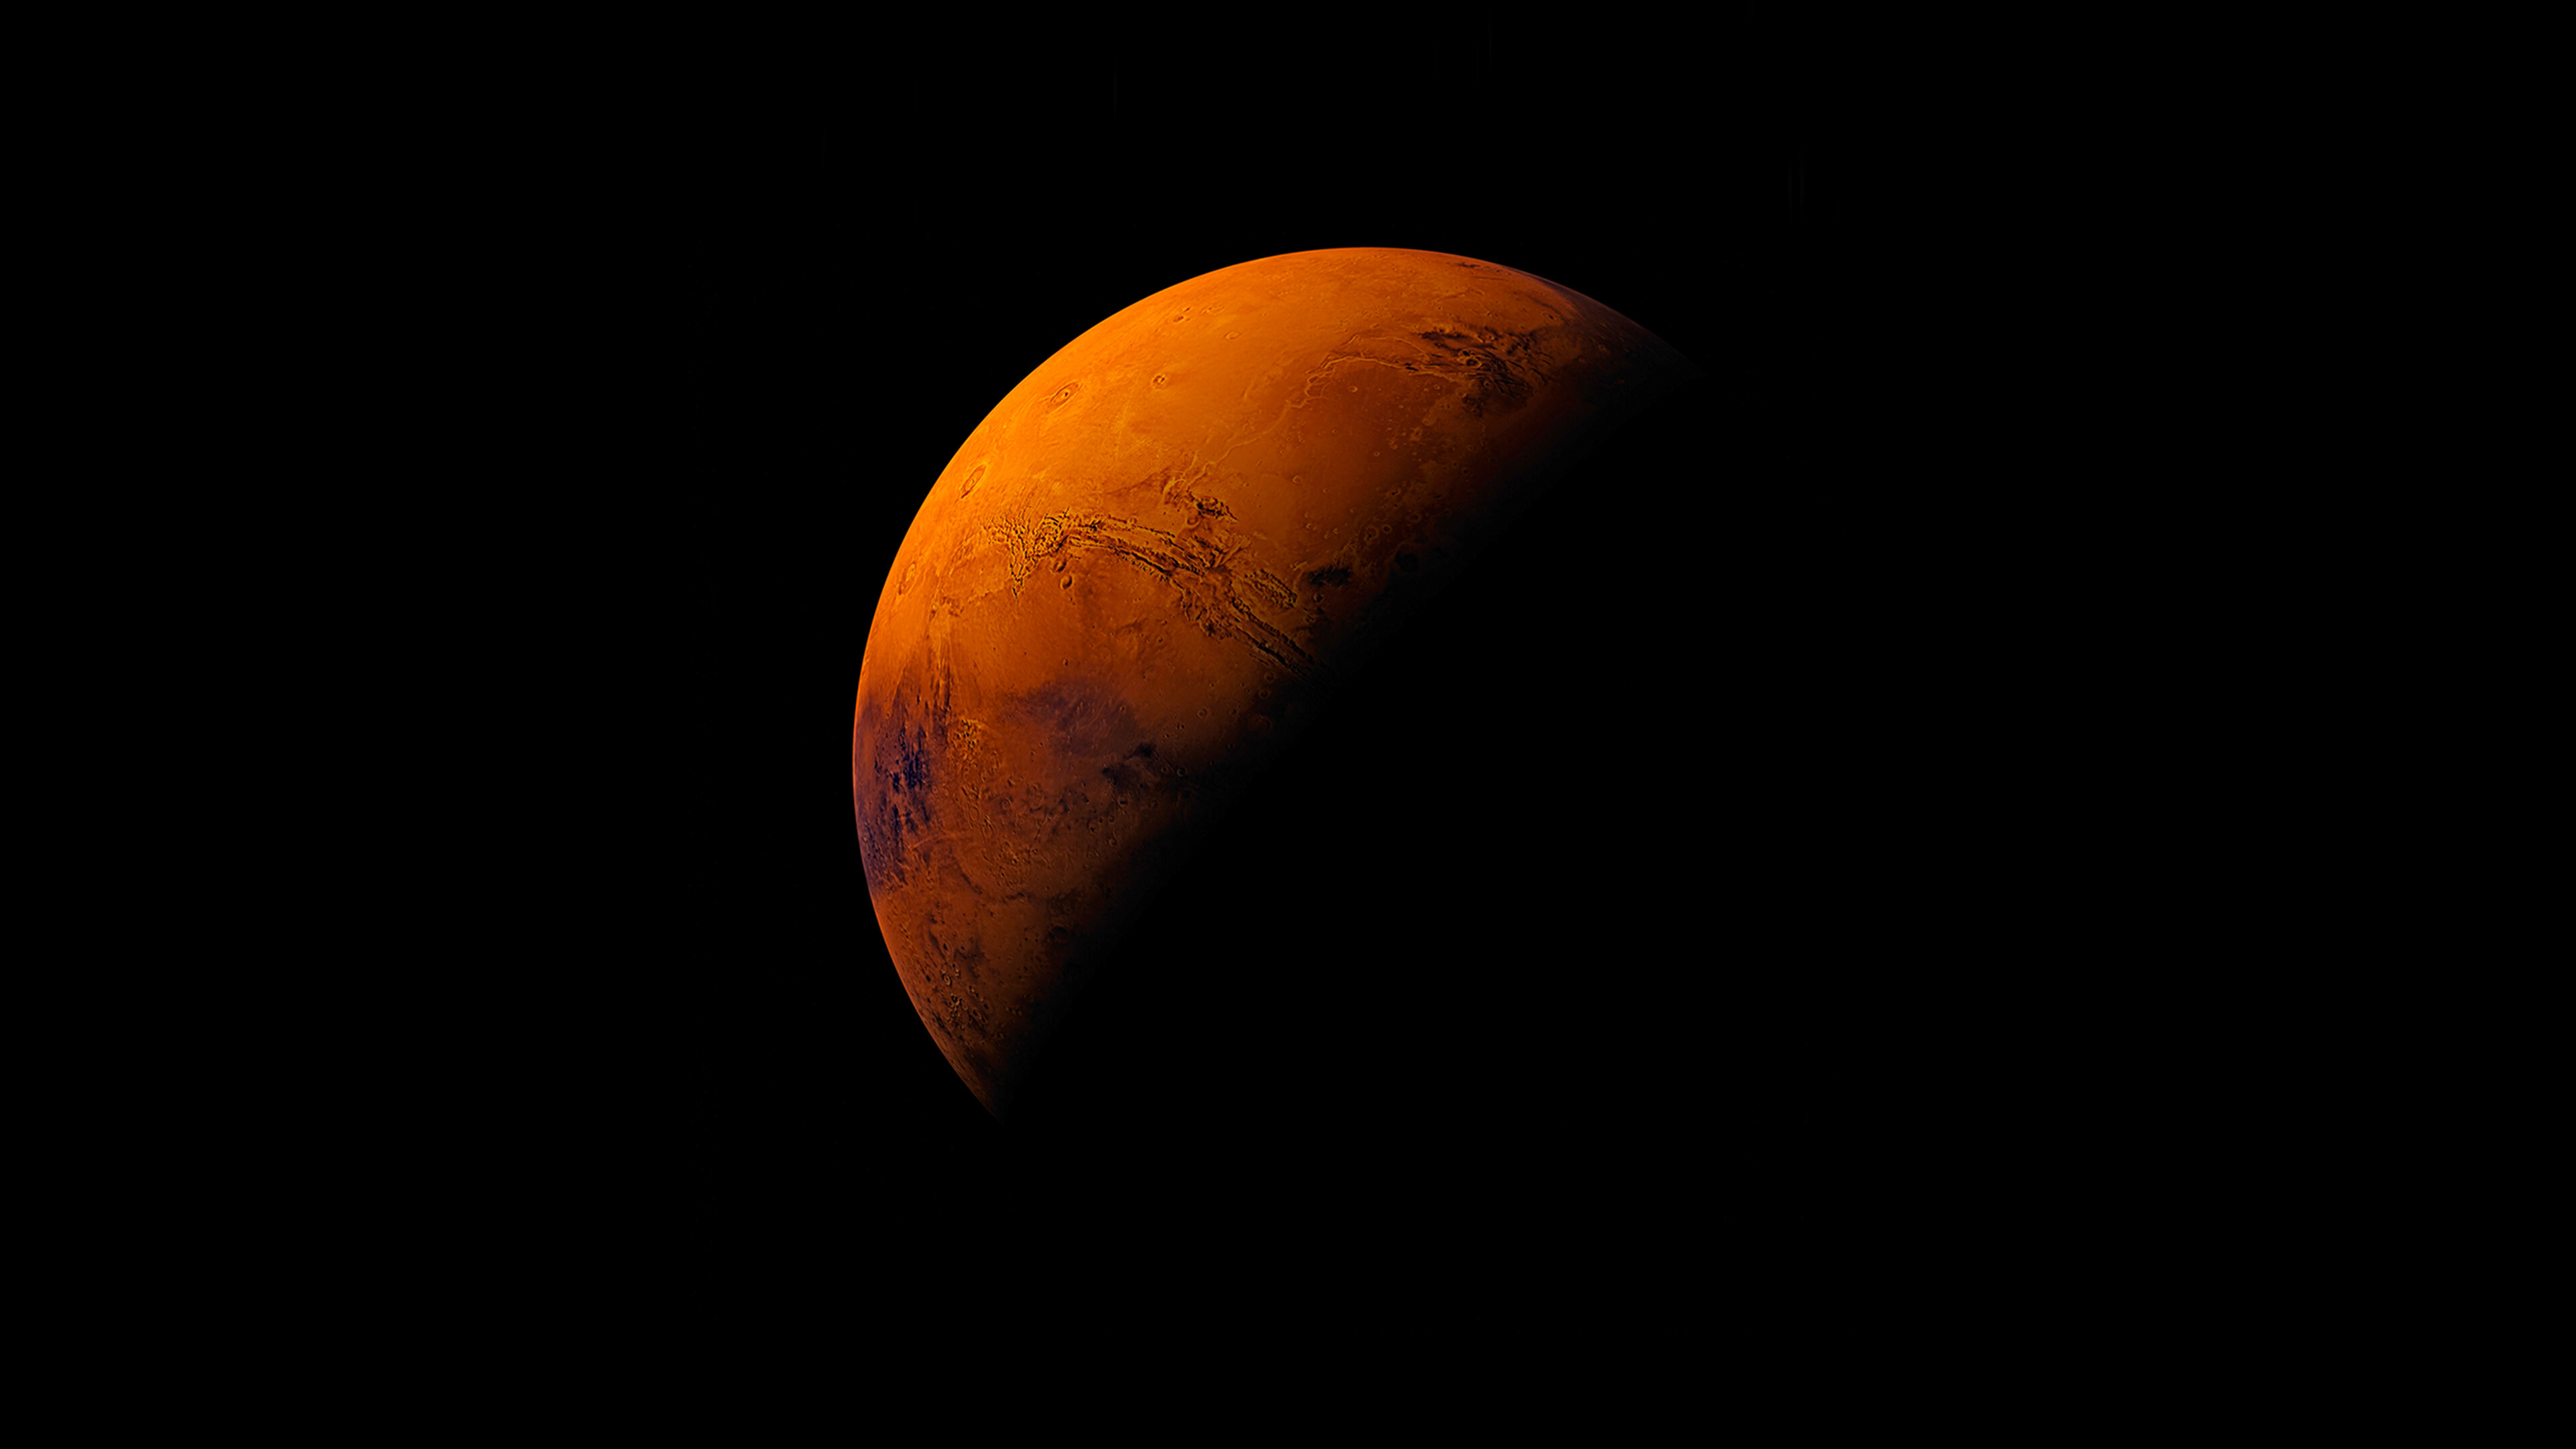 Mars: The planet is named for the Roman god of war. 3840x2160 4K Wallpaper.